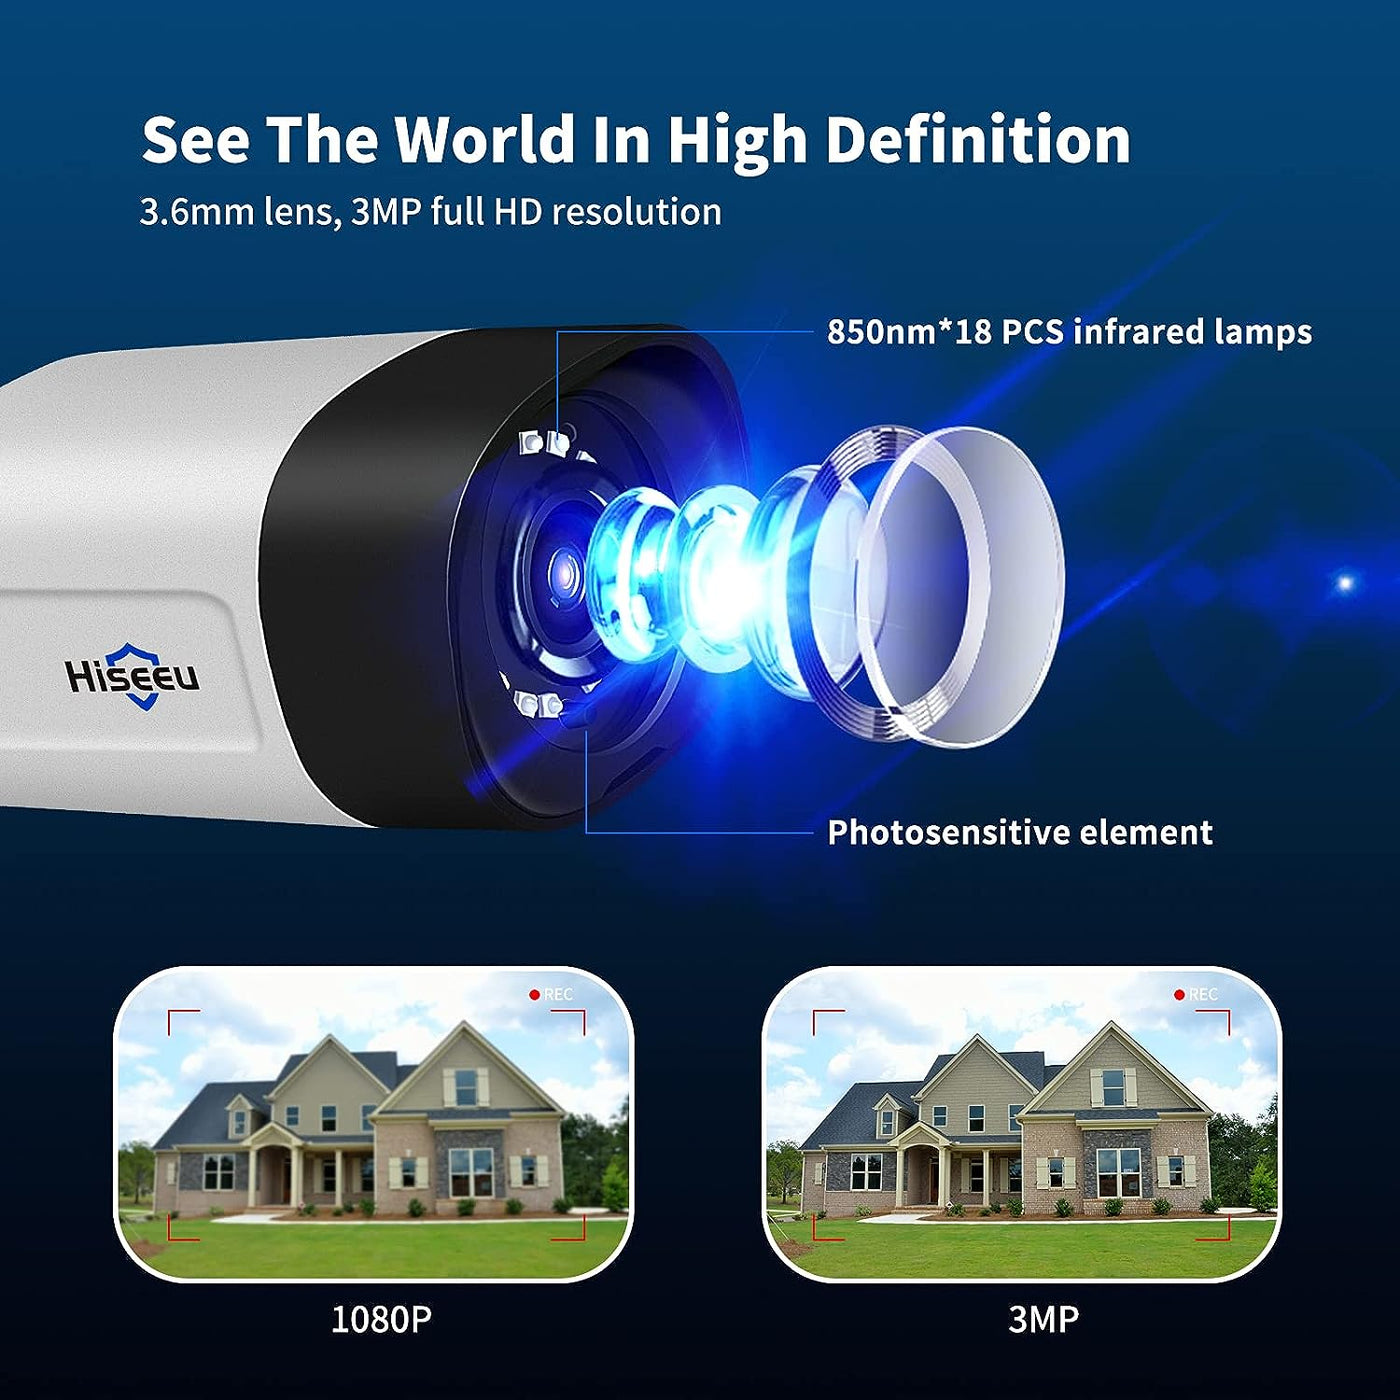 5MP Spotlight Security Camera Wireless Outdoor, Home Security, Color Night Vision, 2.4Ghz WiFi Only, SD Card and Cloud Storage Supported, Work with Alexa